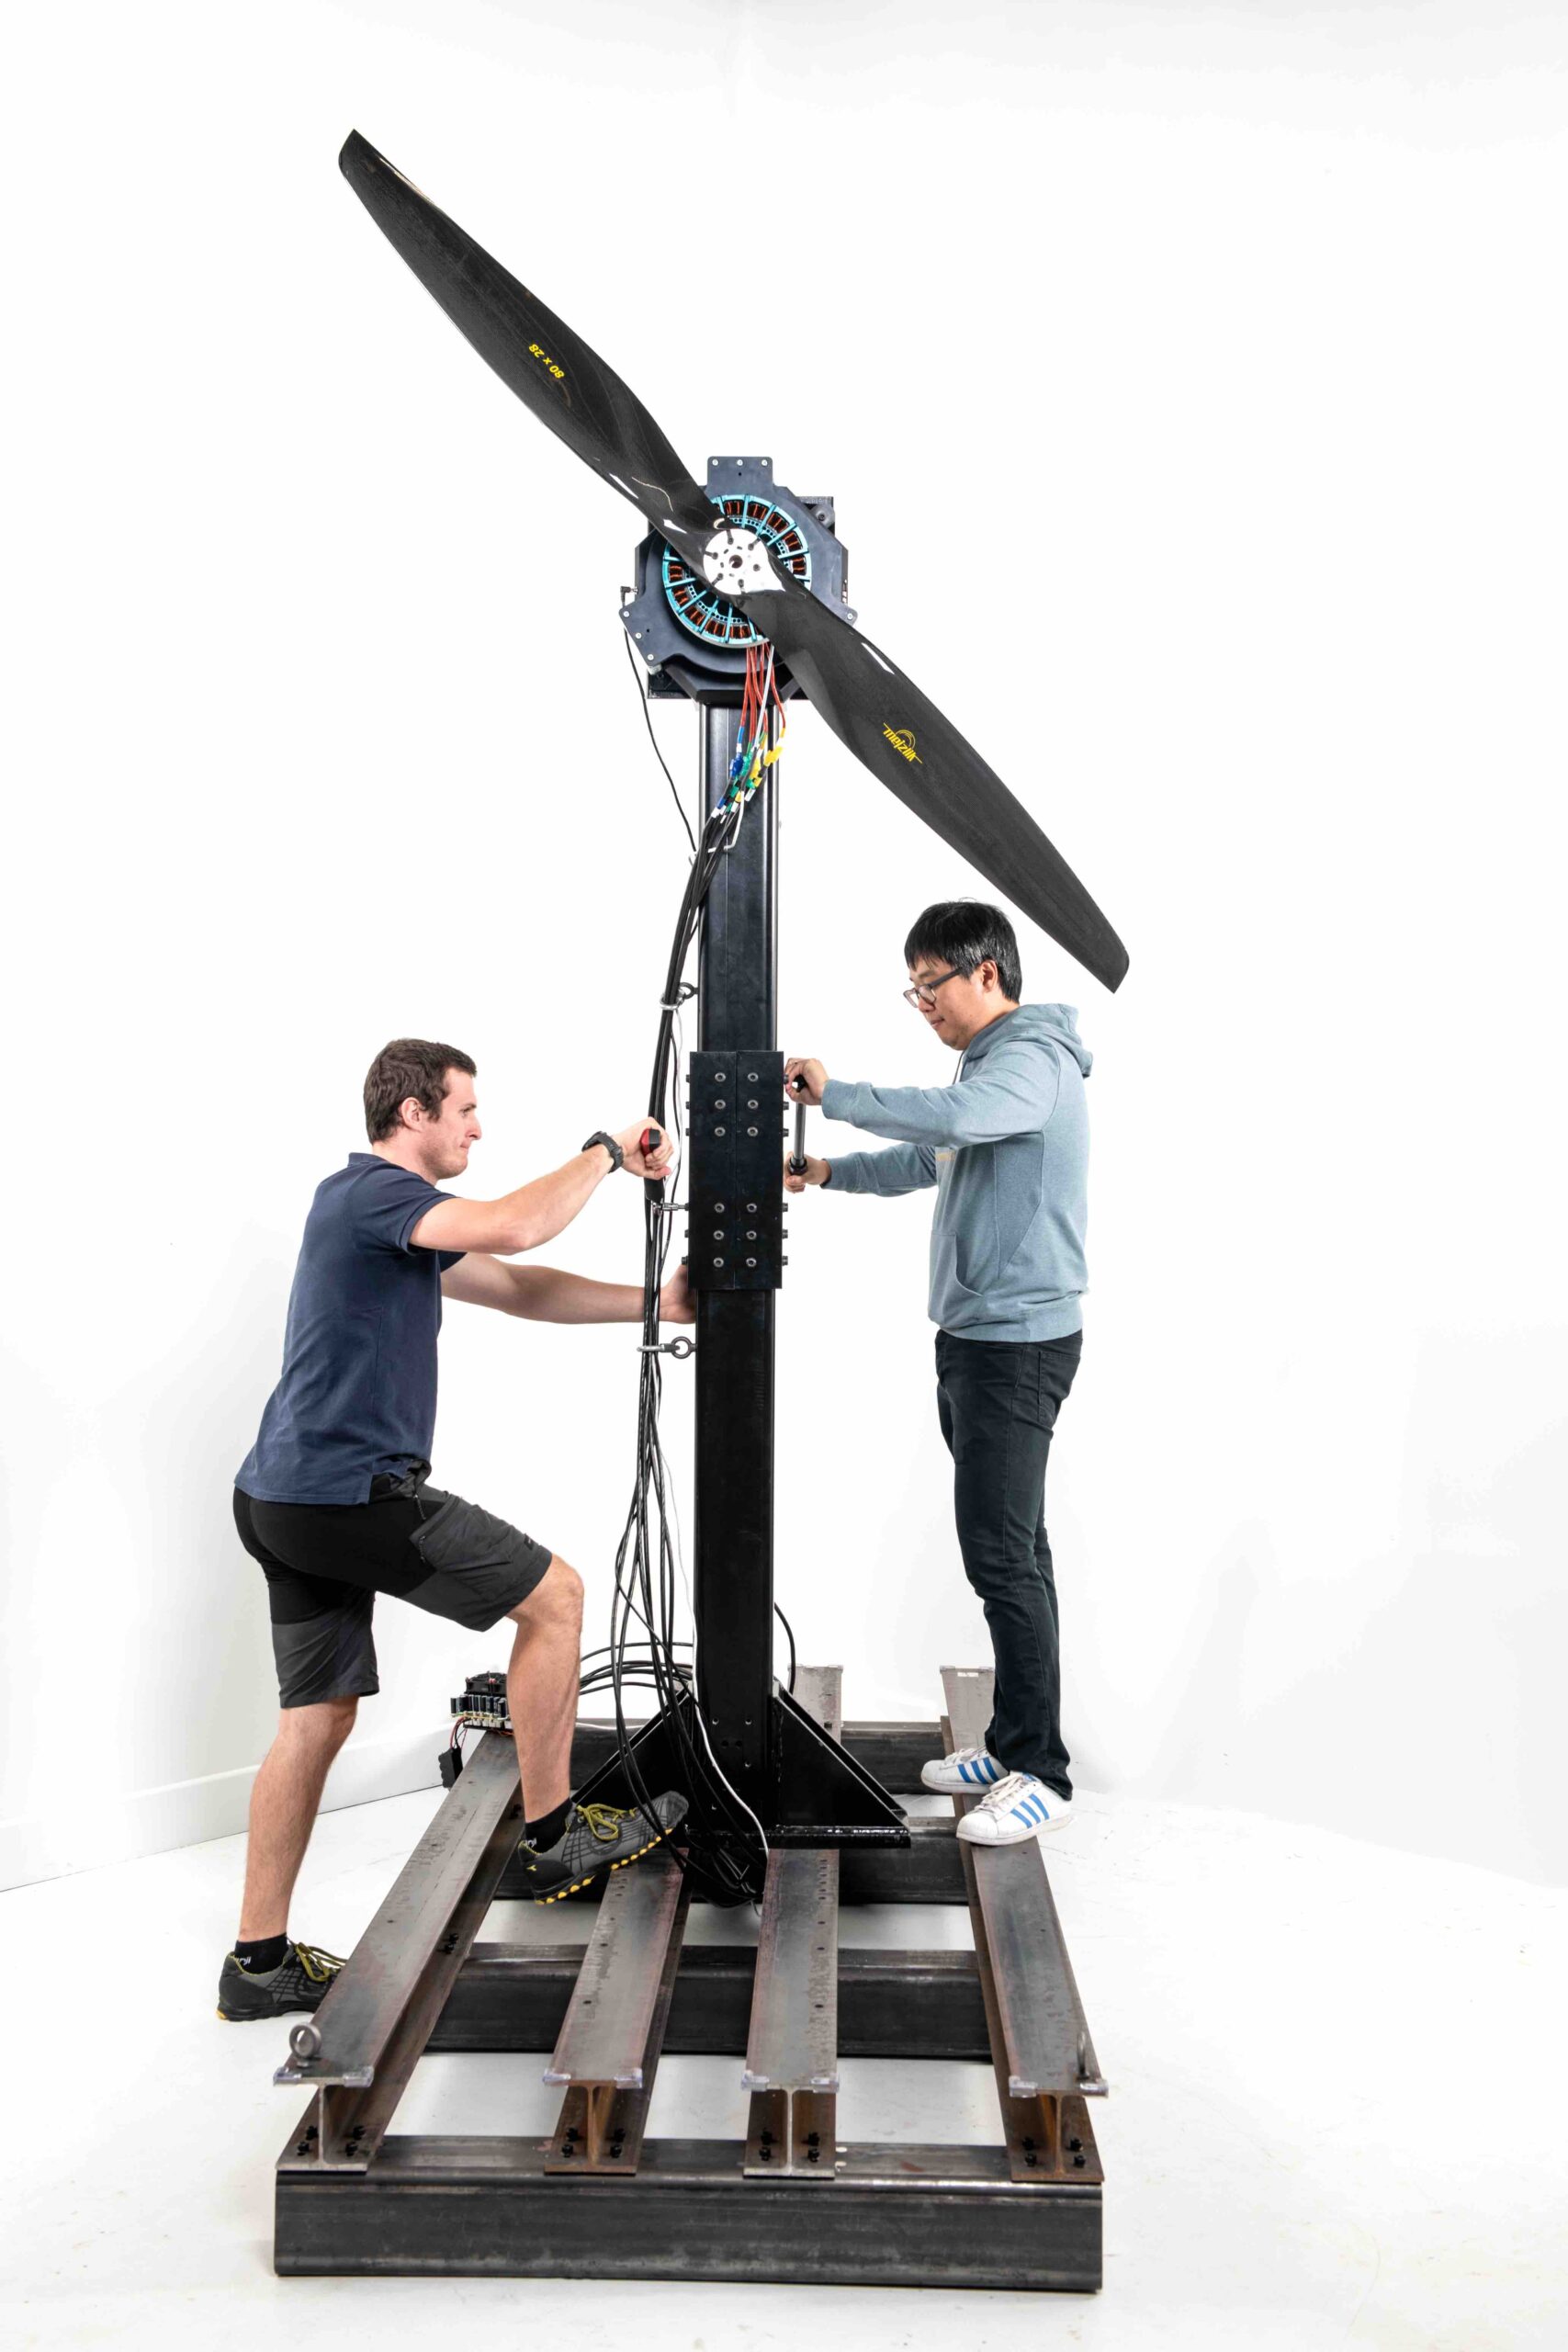 Tyto Robotics Launches Flight Stand 500 for Advanced Air Mobility Propulsion Testing